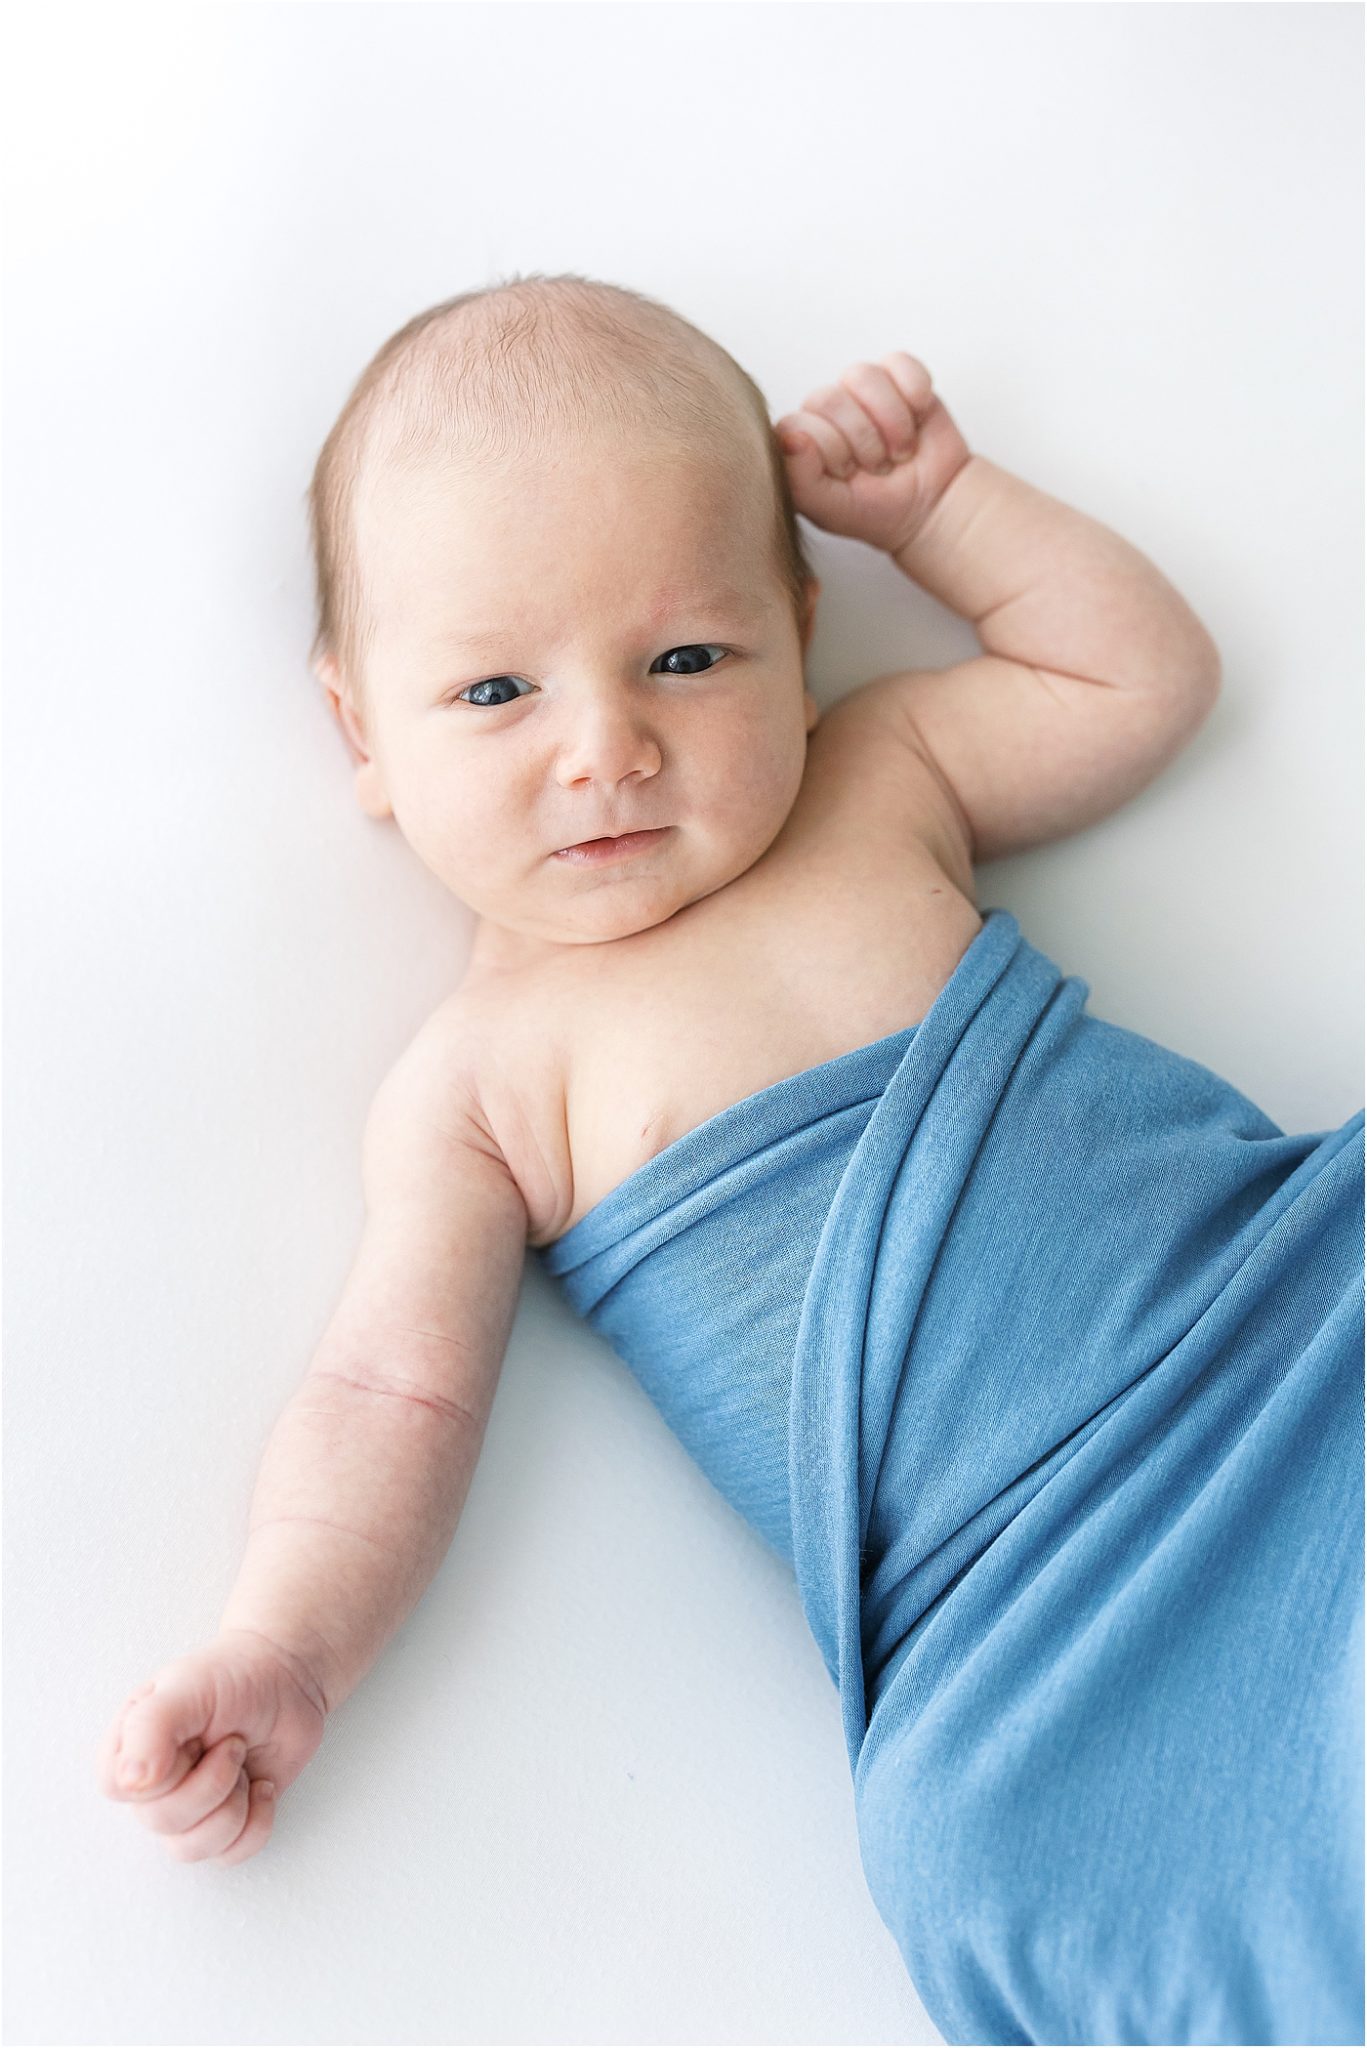 Studio newborn photography with baby-led posing in Fishers Indiana | Lindsay Konopa Photography